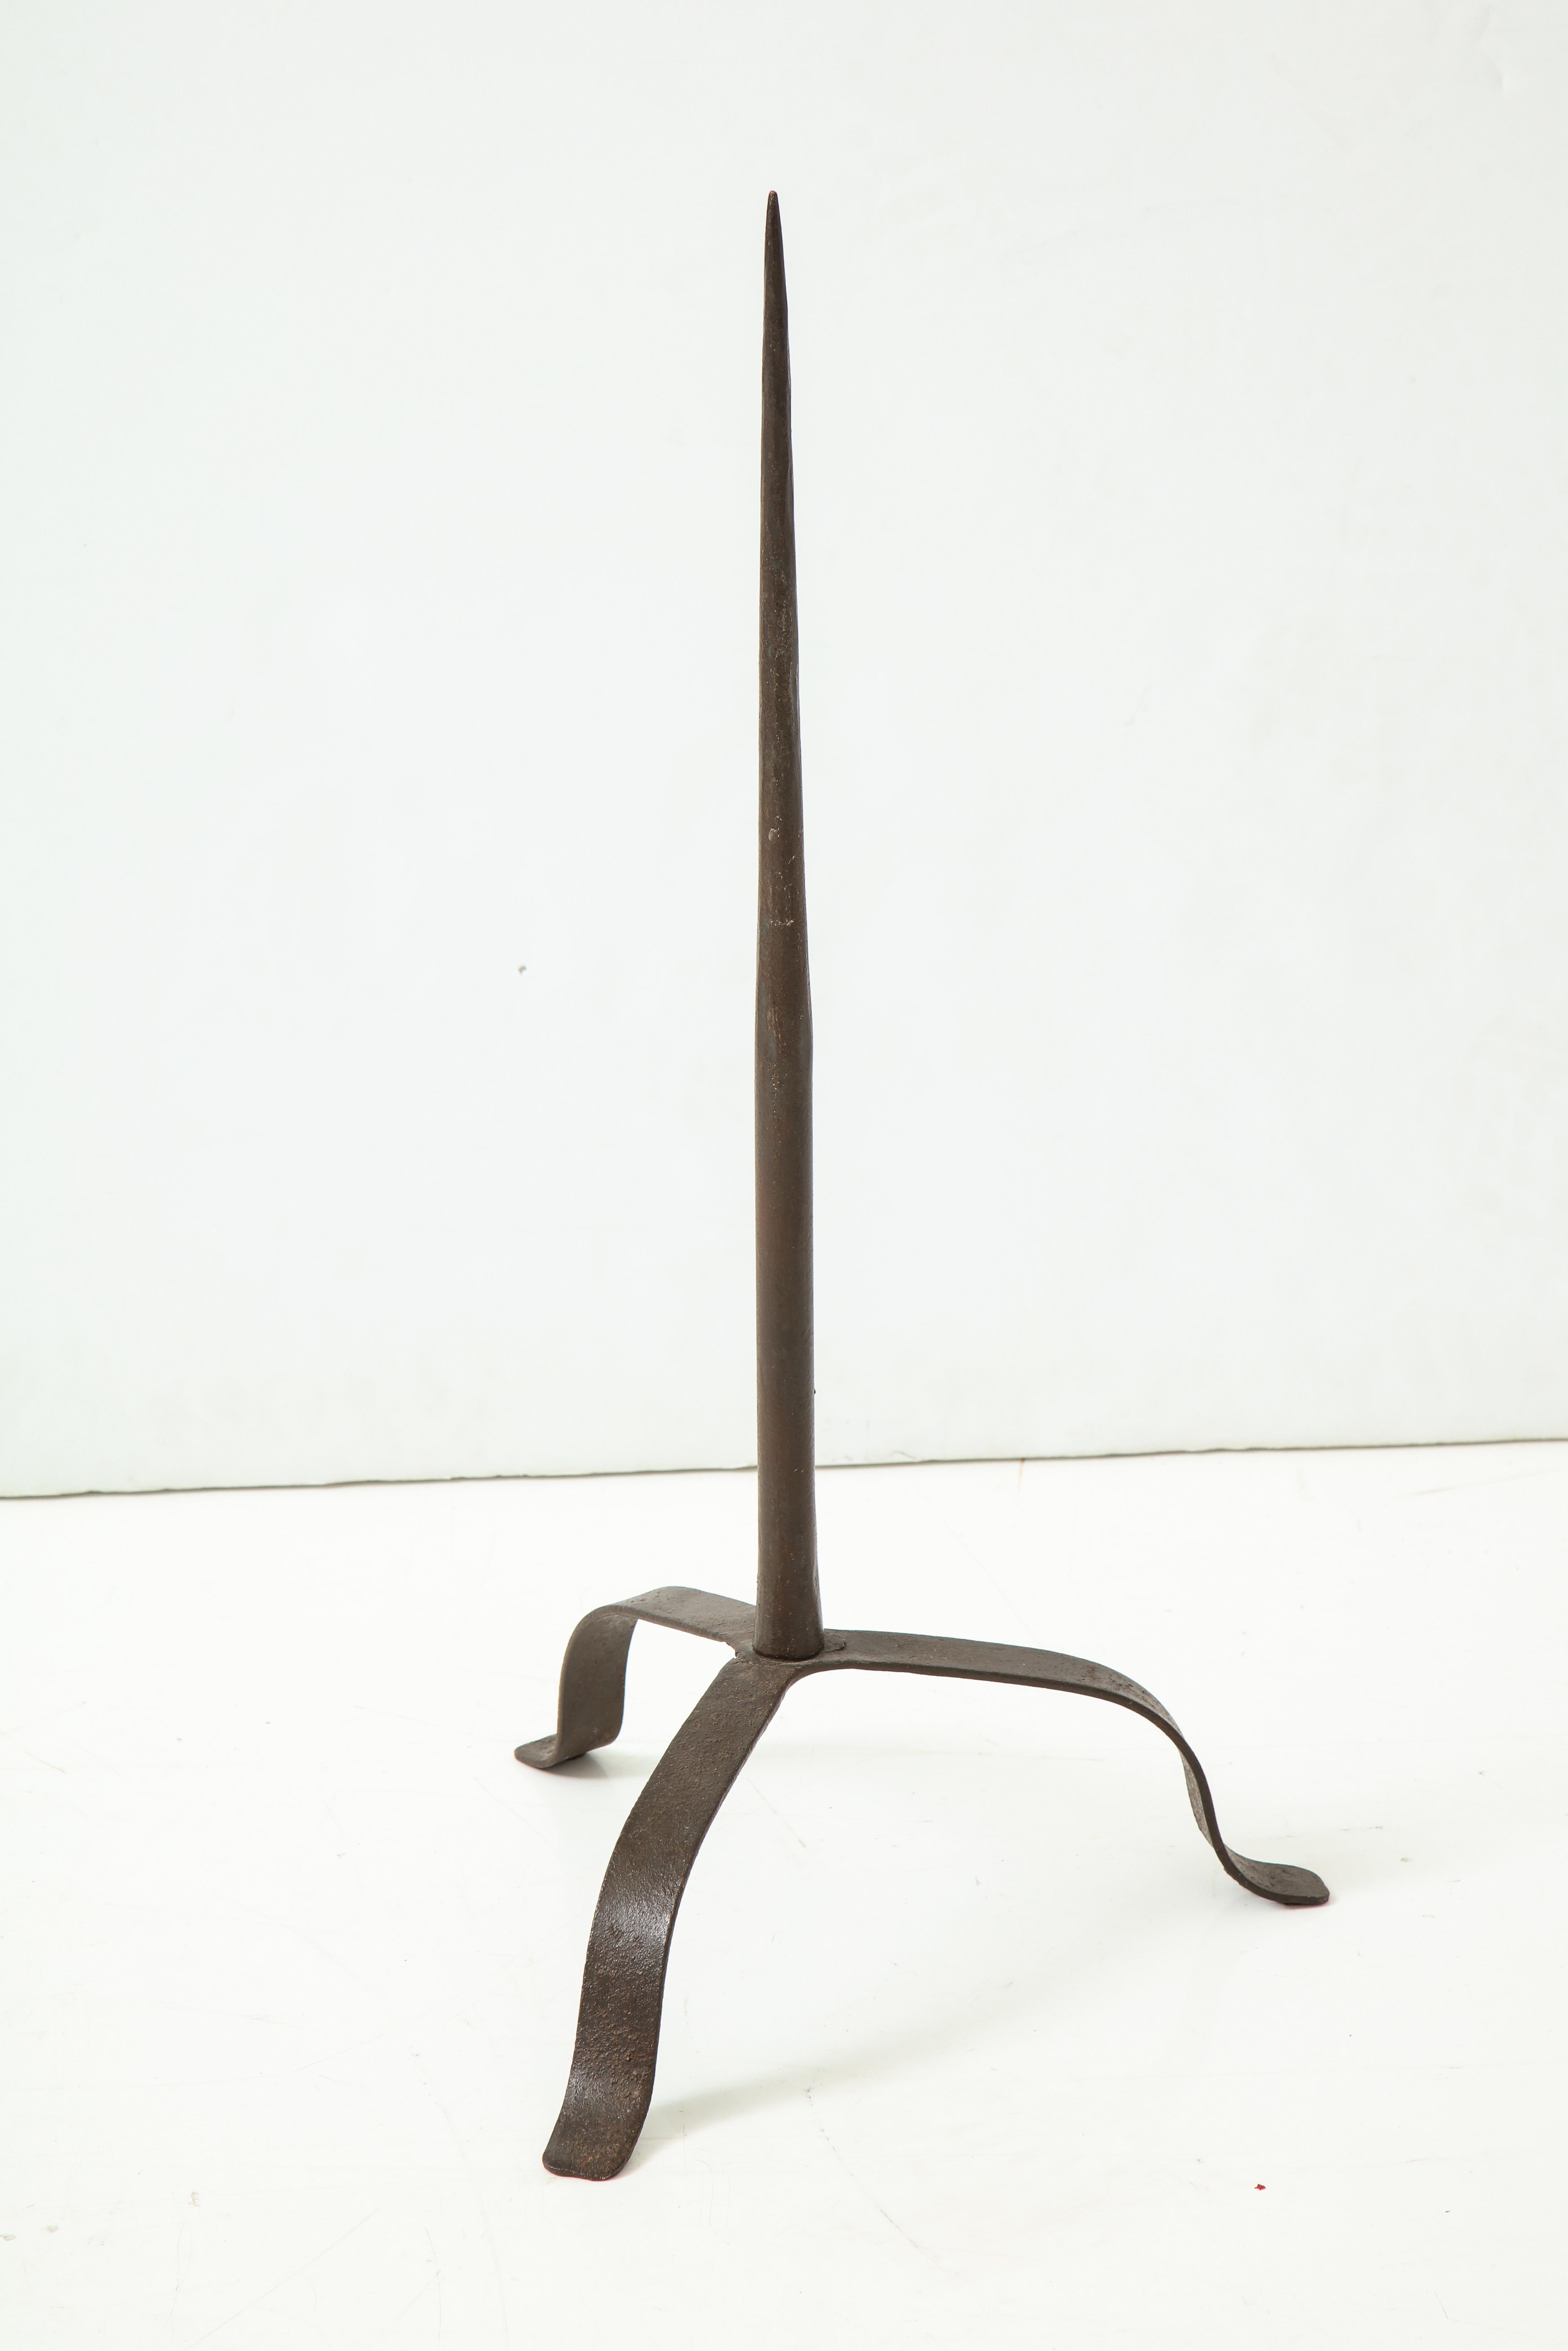 17th century French or Italian forged iron pricket candlestick.
Measures: H 25.75.